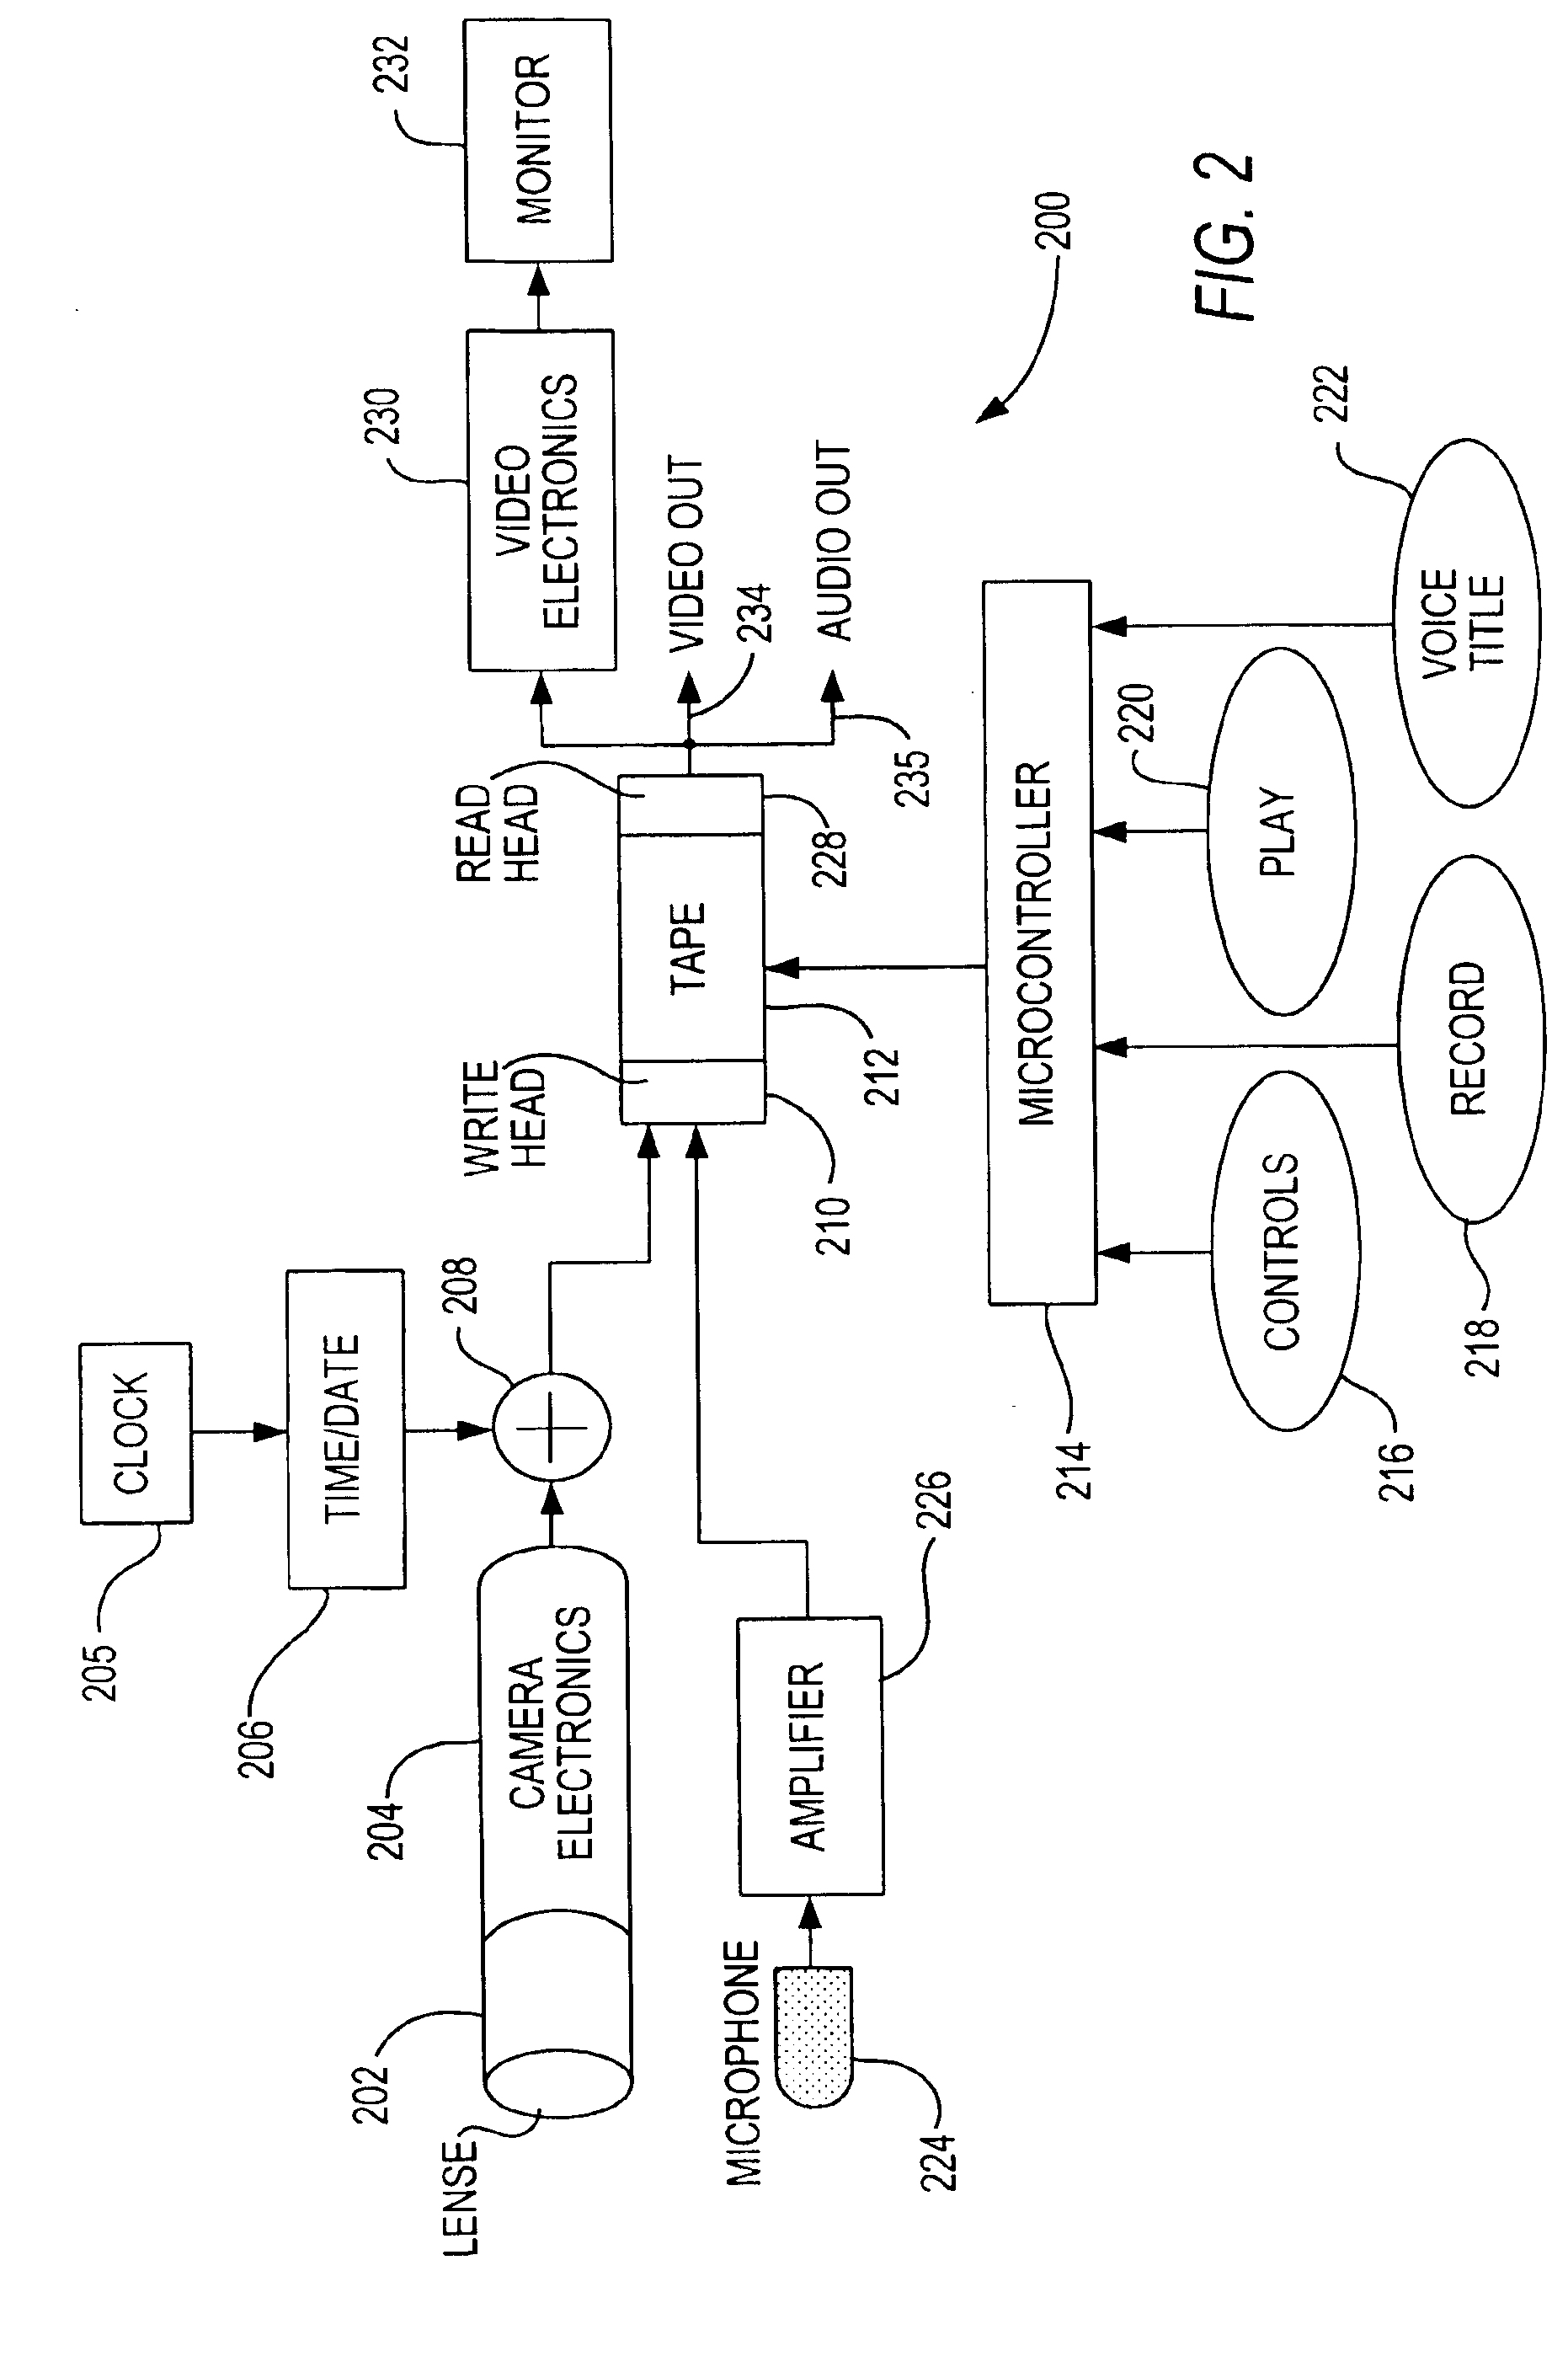 Apparatus and methods for voice titles